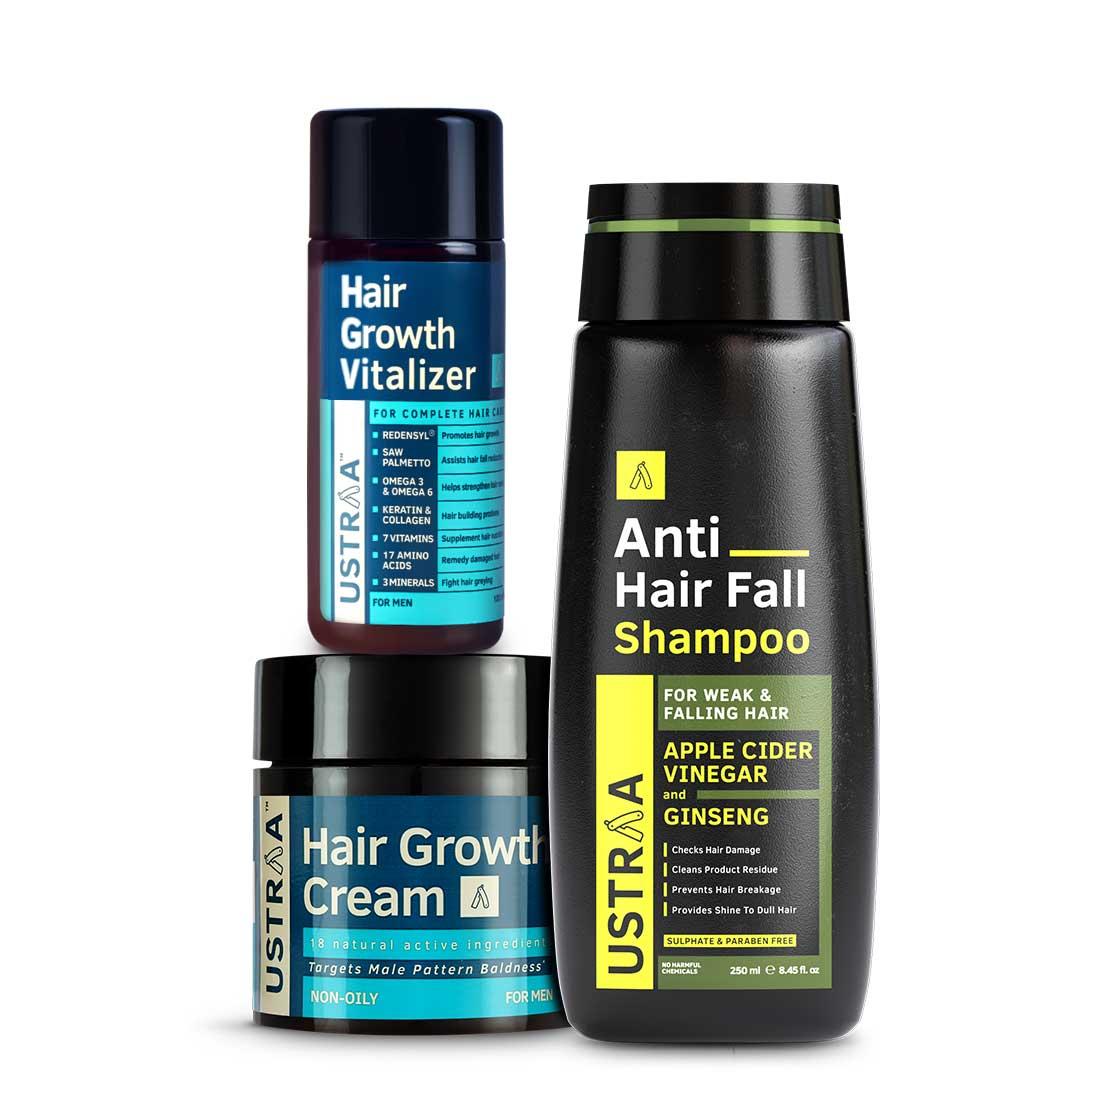 Ustraa Complete Treatment Hair Growth Kit for Men : Hair Growth Vitalizer, Hair Growth Cream & Anti-Hairfall Shampoo